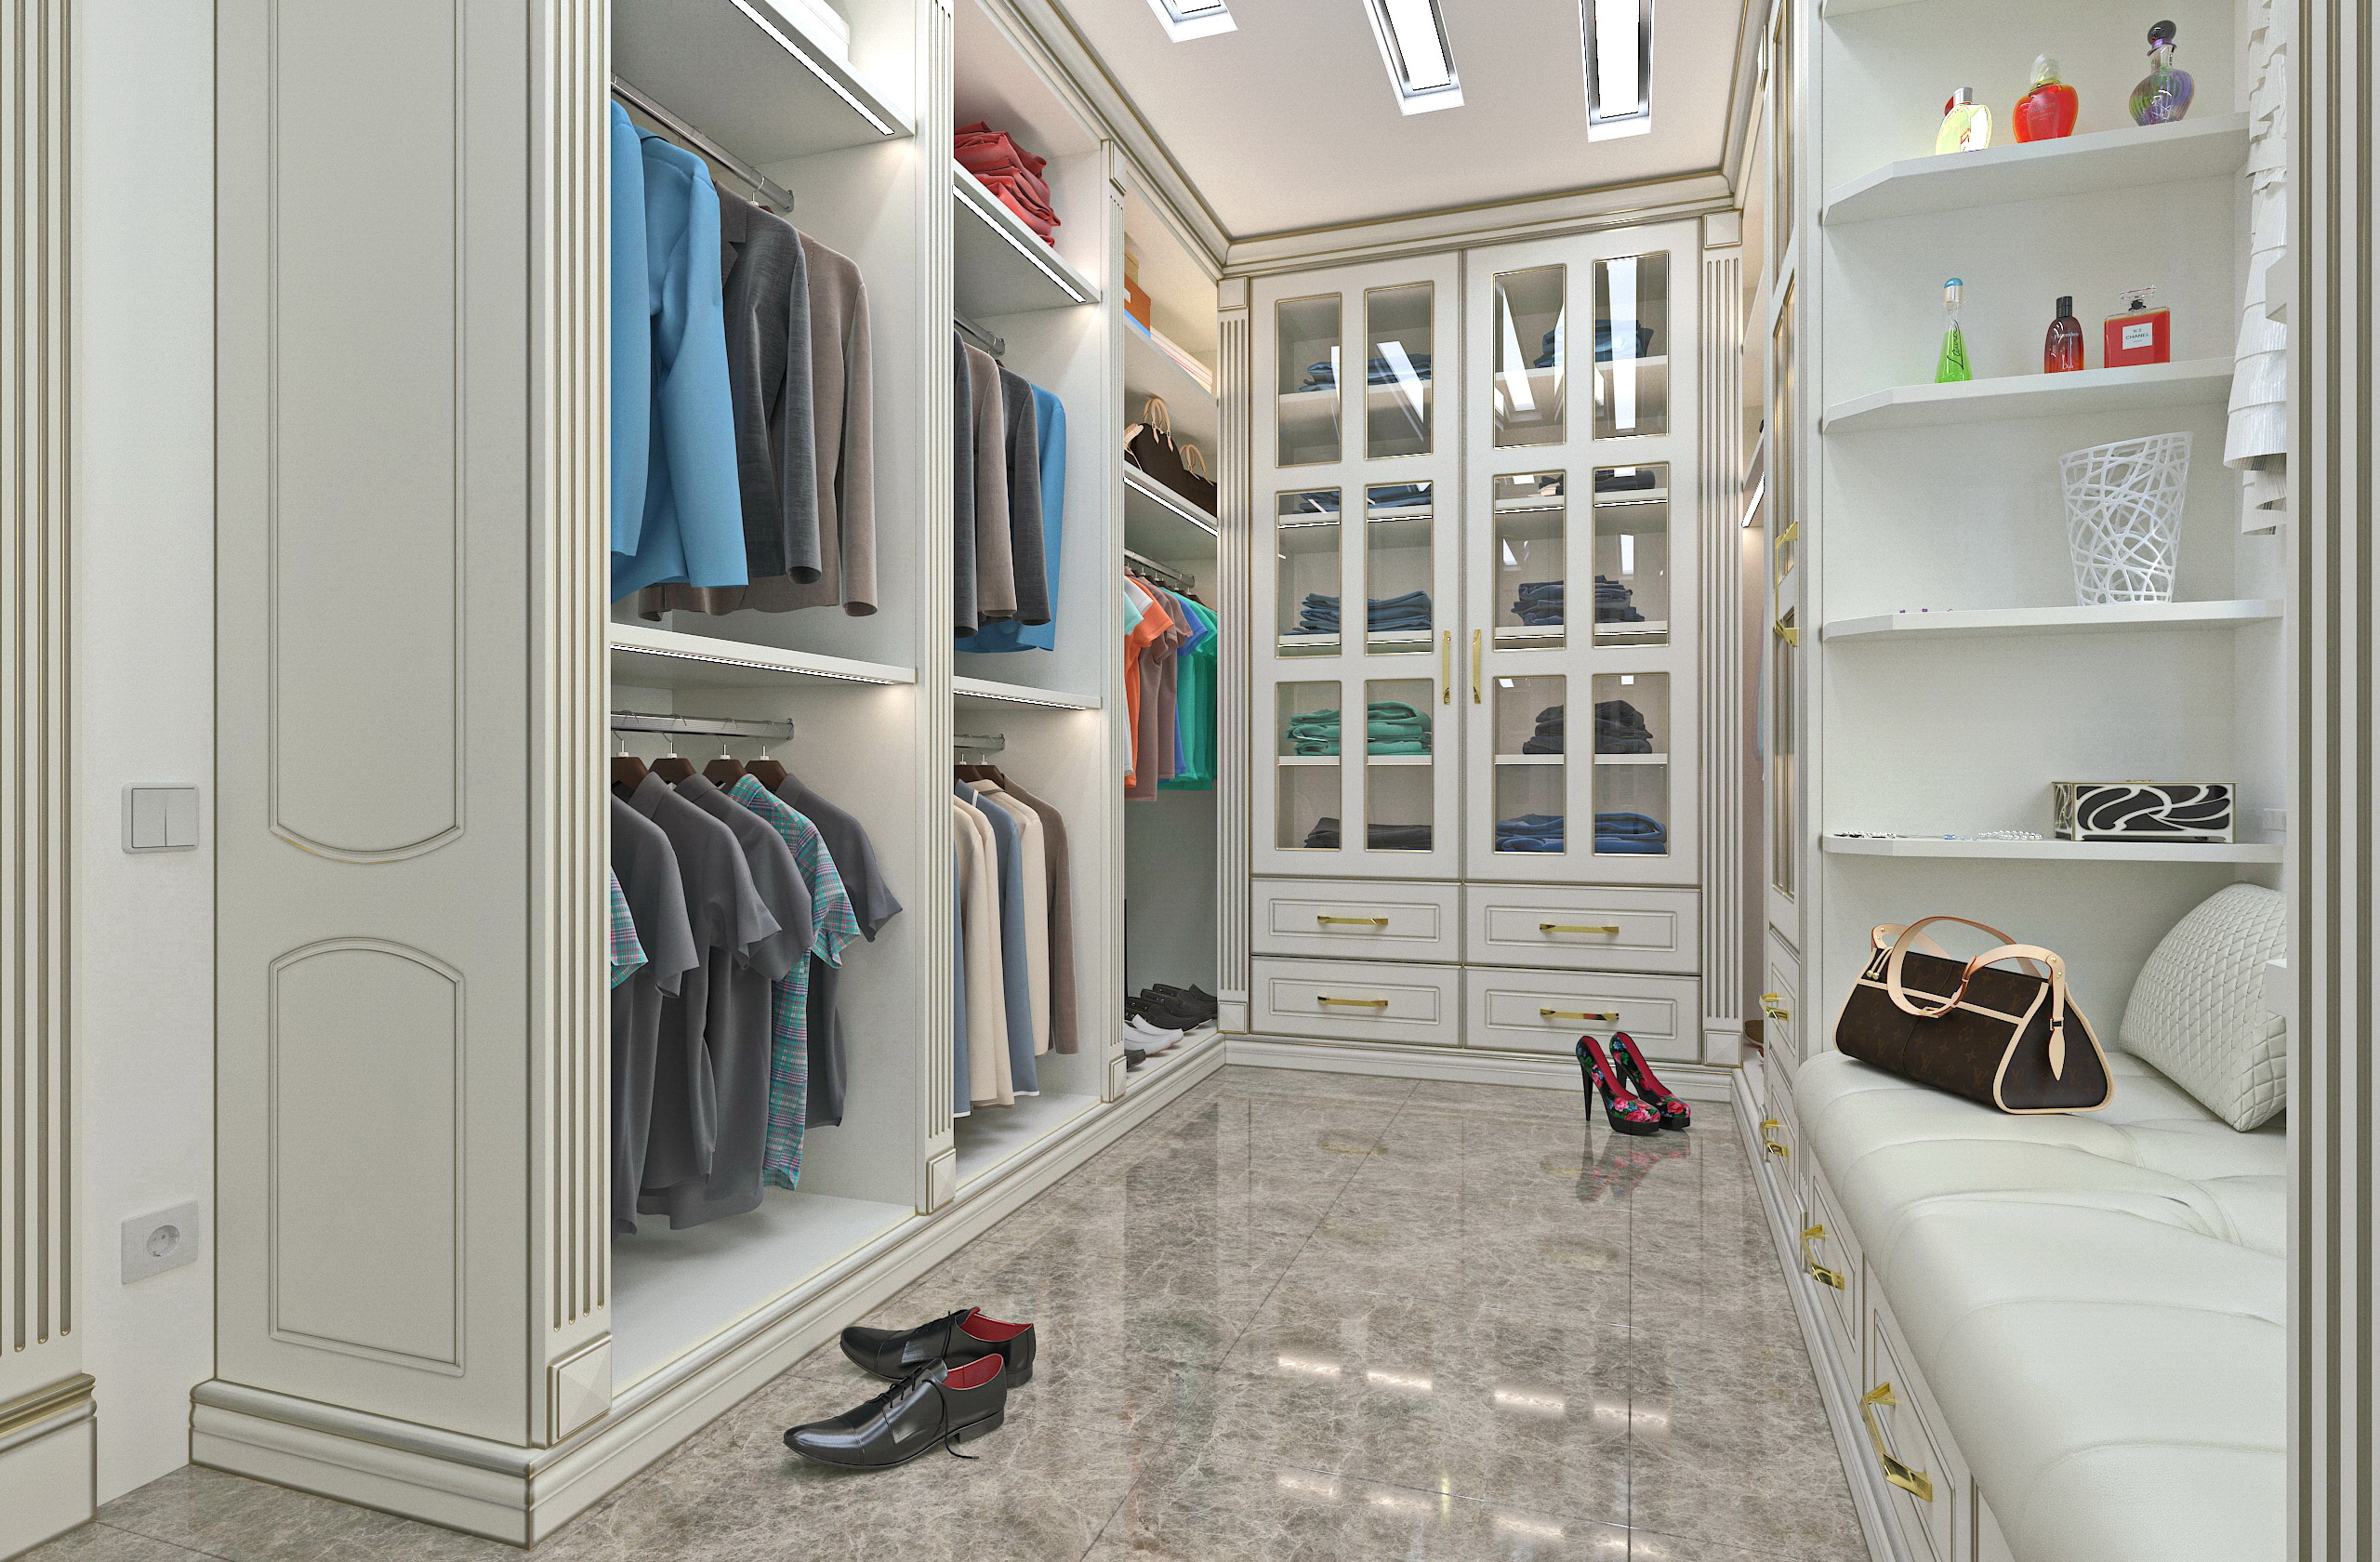 Cloakroom in a classic style in SolidWorks vray 3.0 image